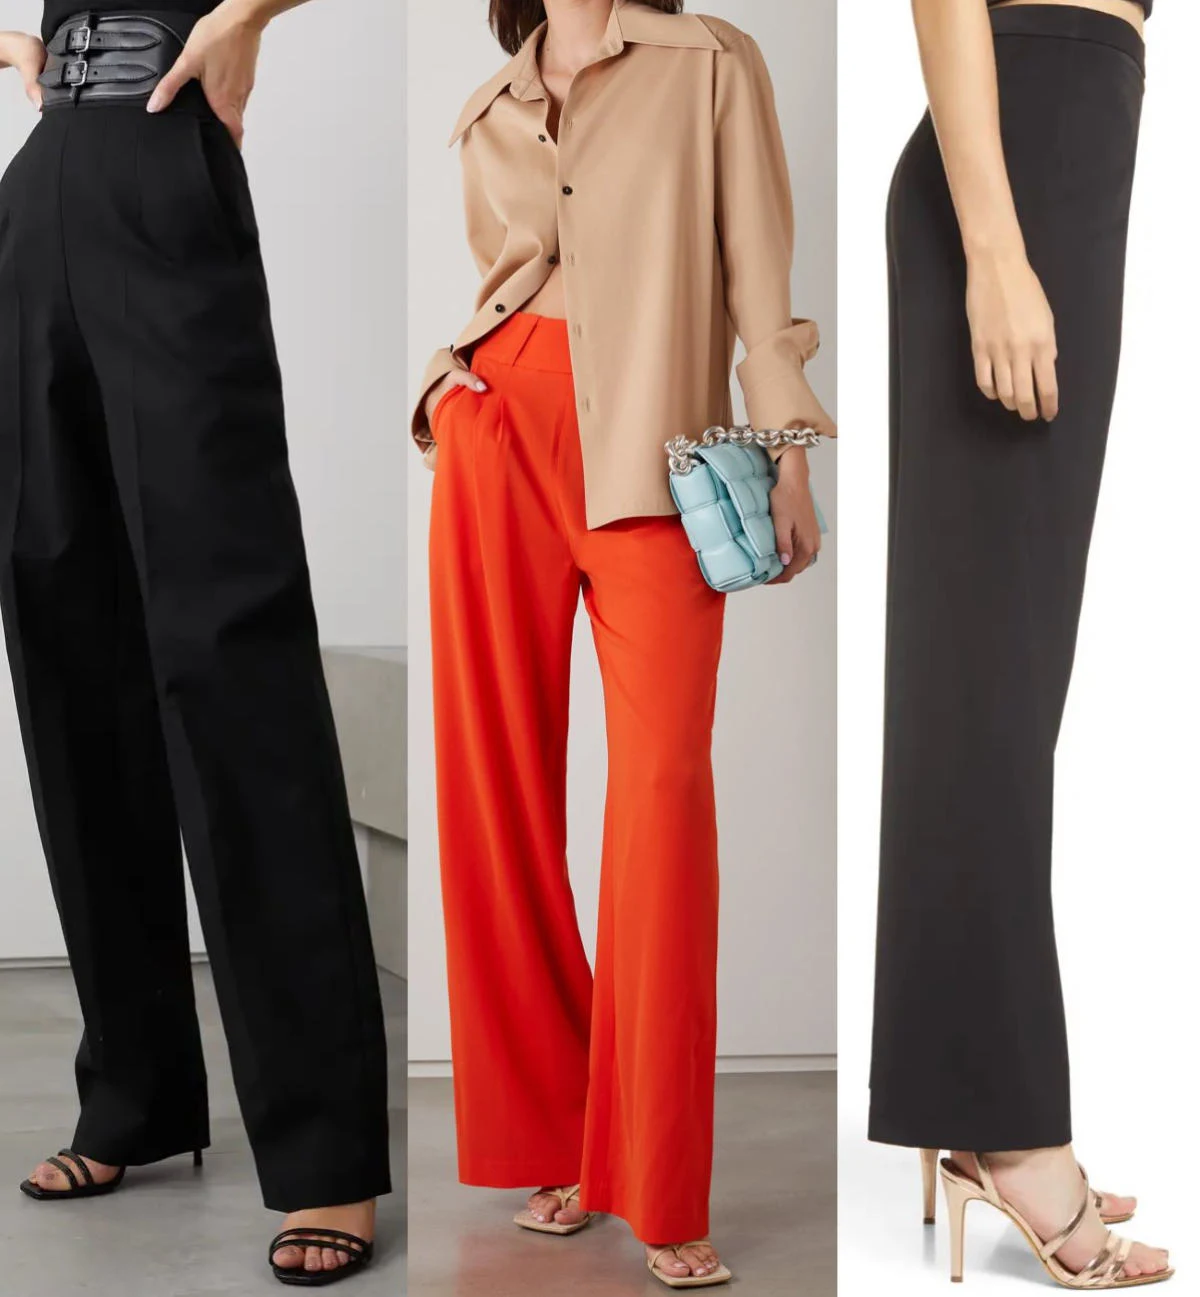 Strappy Sandals to Wear with wide leg pants trousers women.jpg